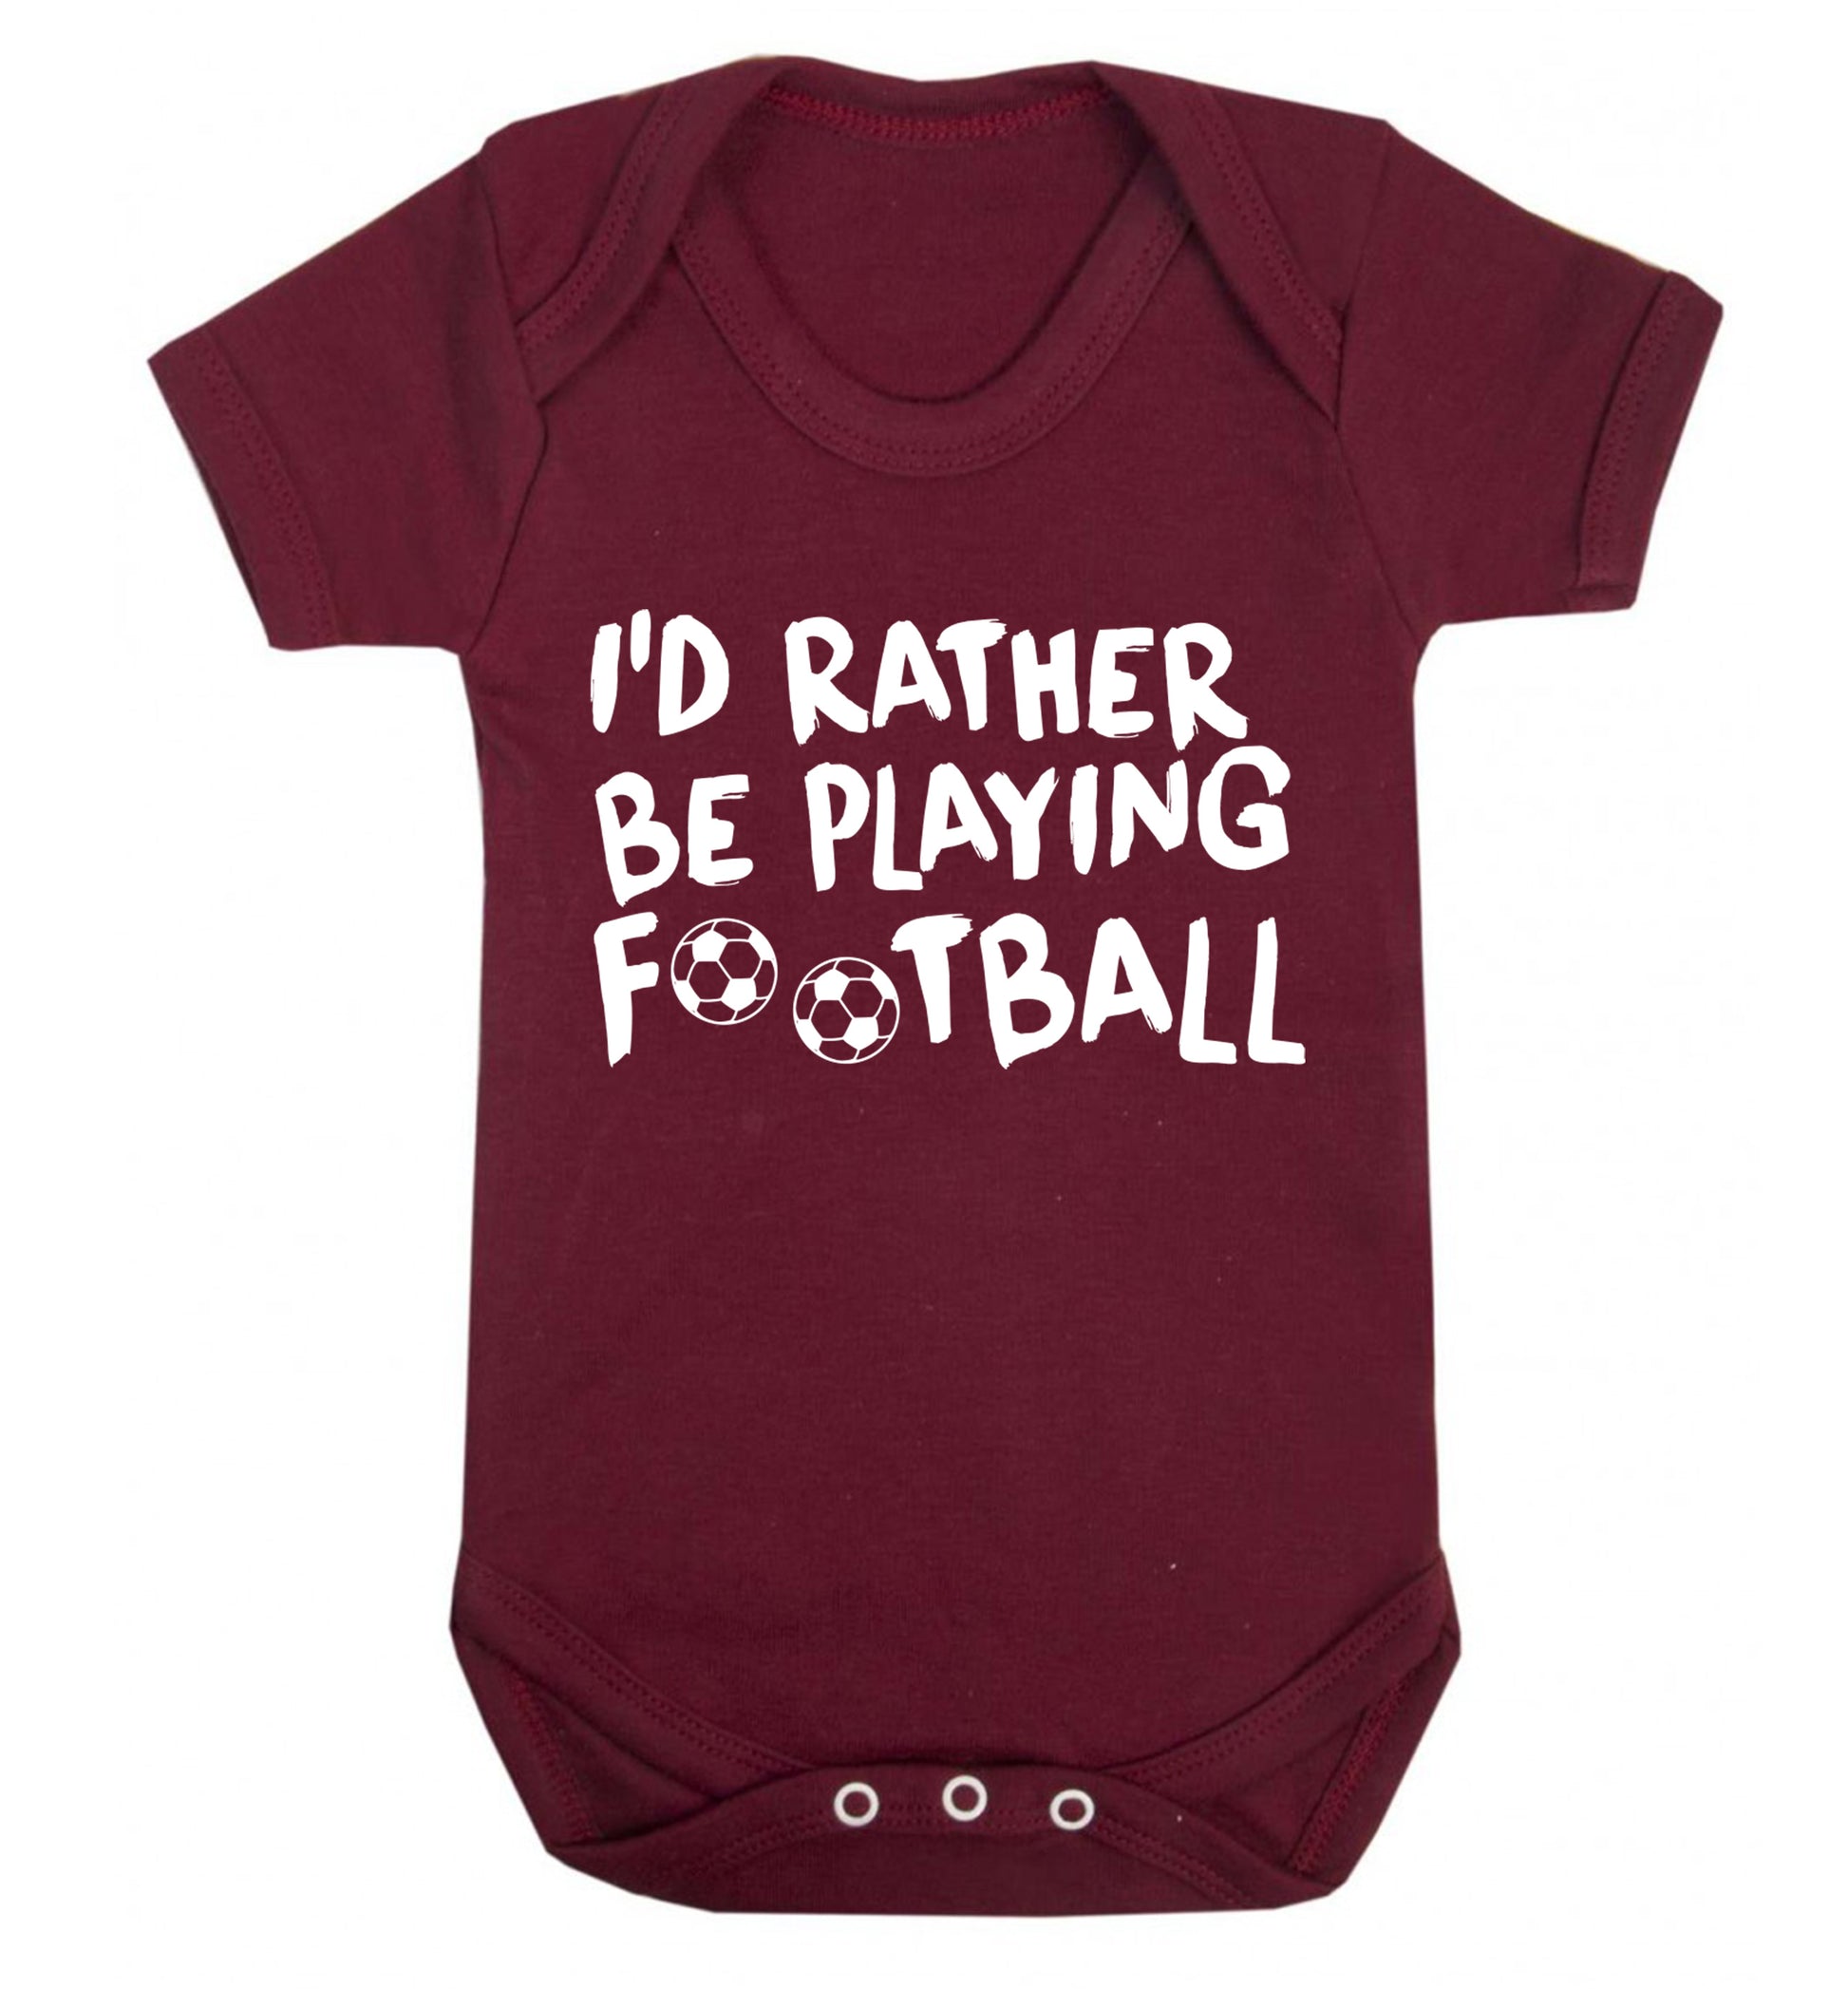 I'd rather be playing football Baby Vest maroon 18-24 months